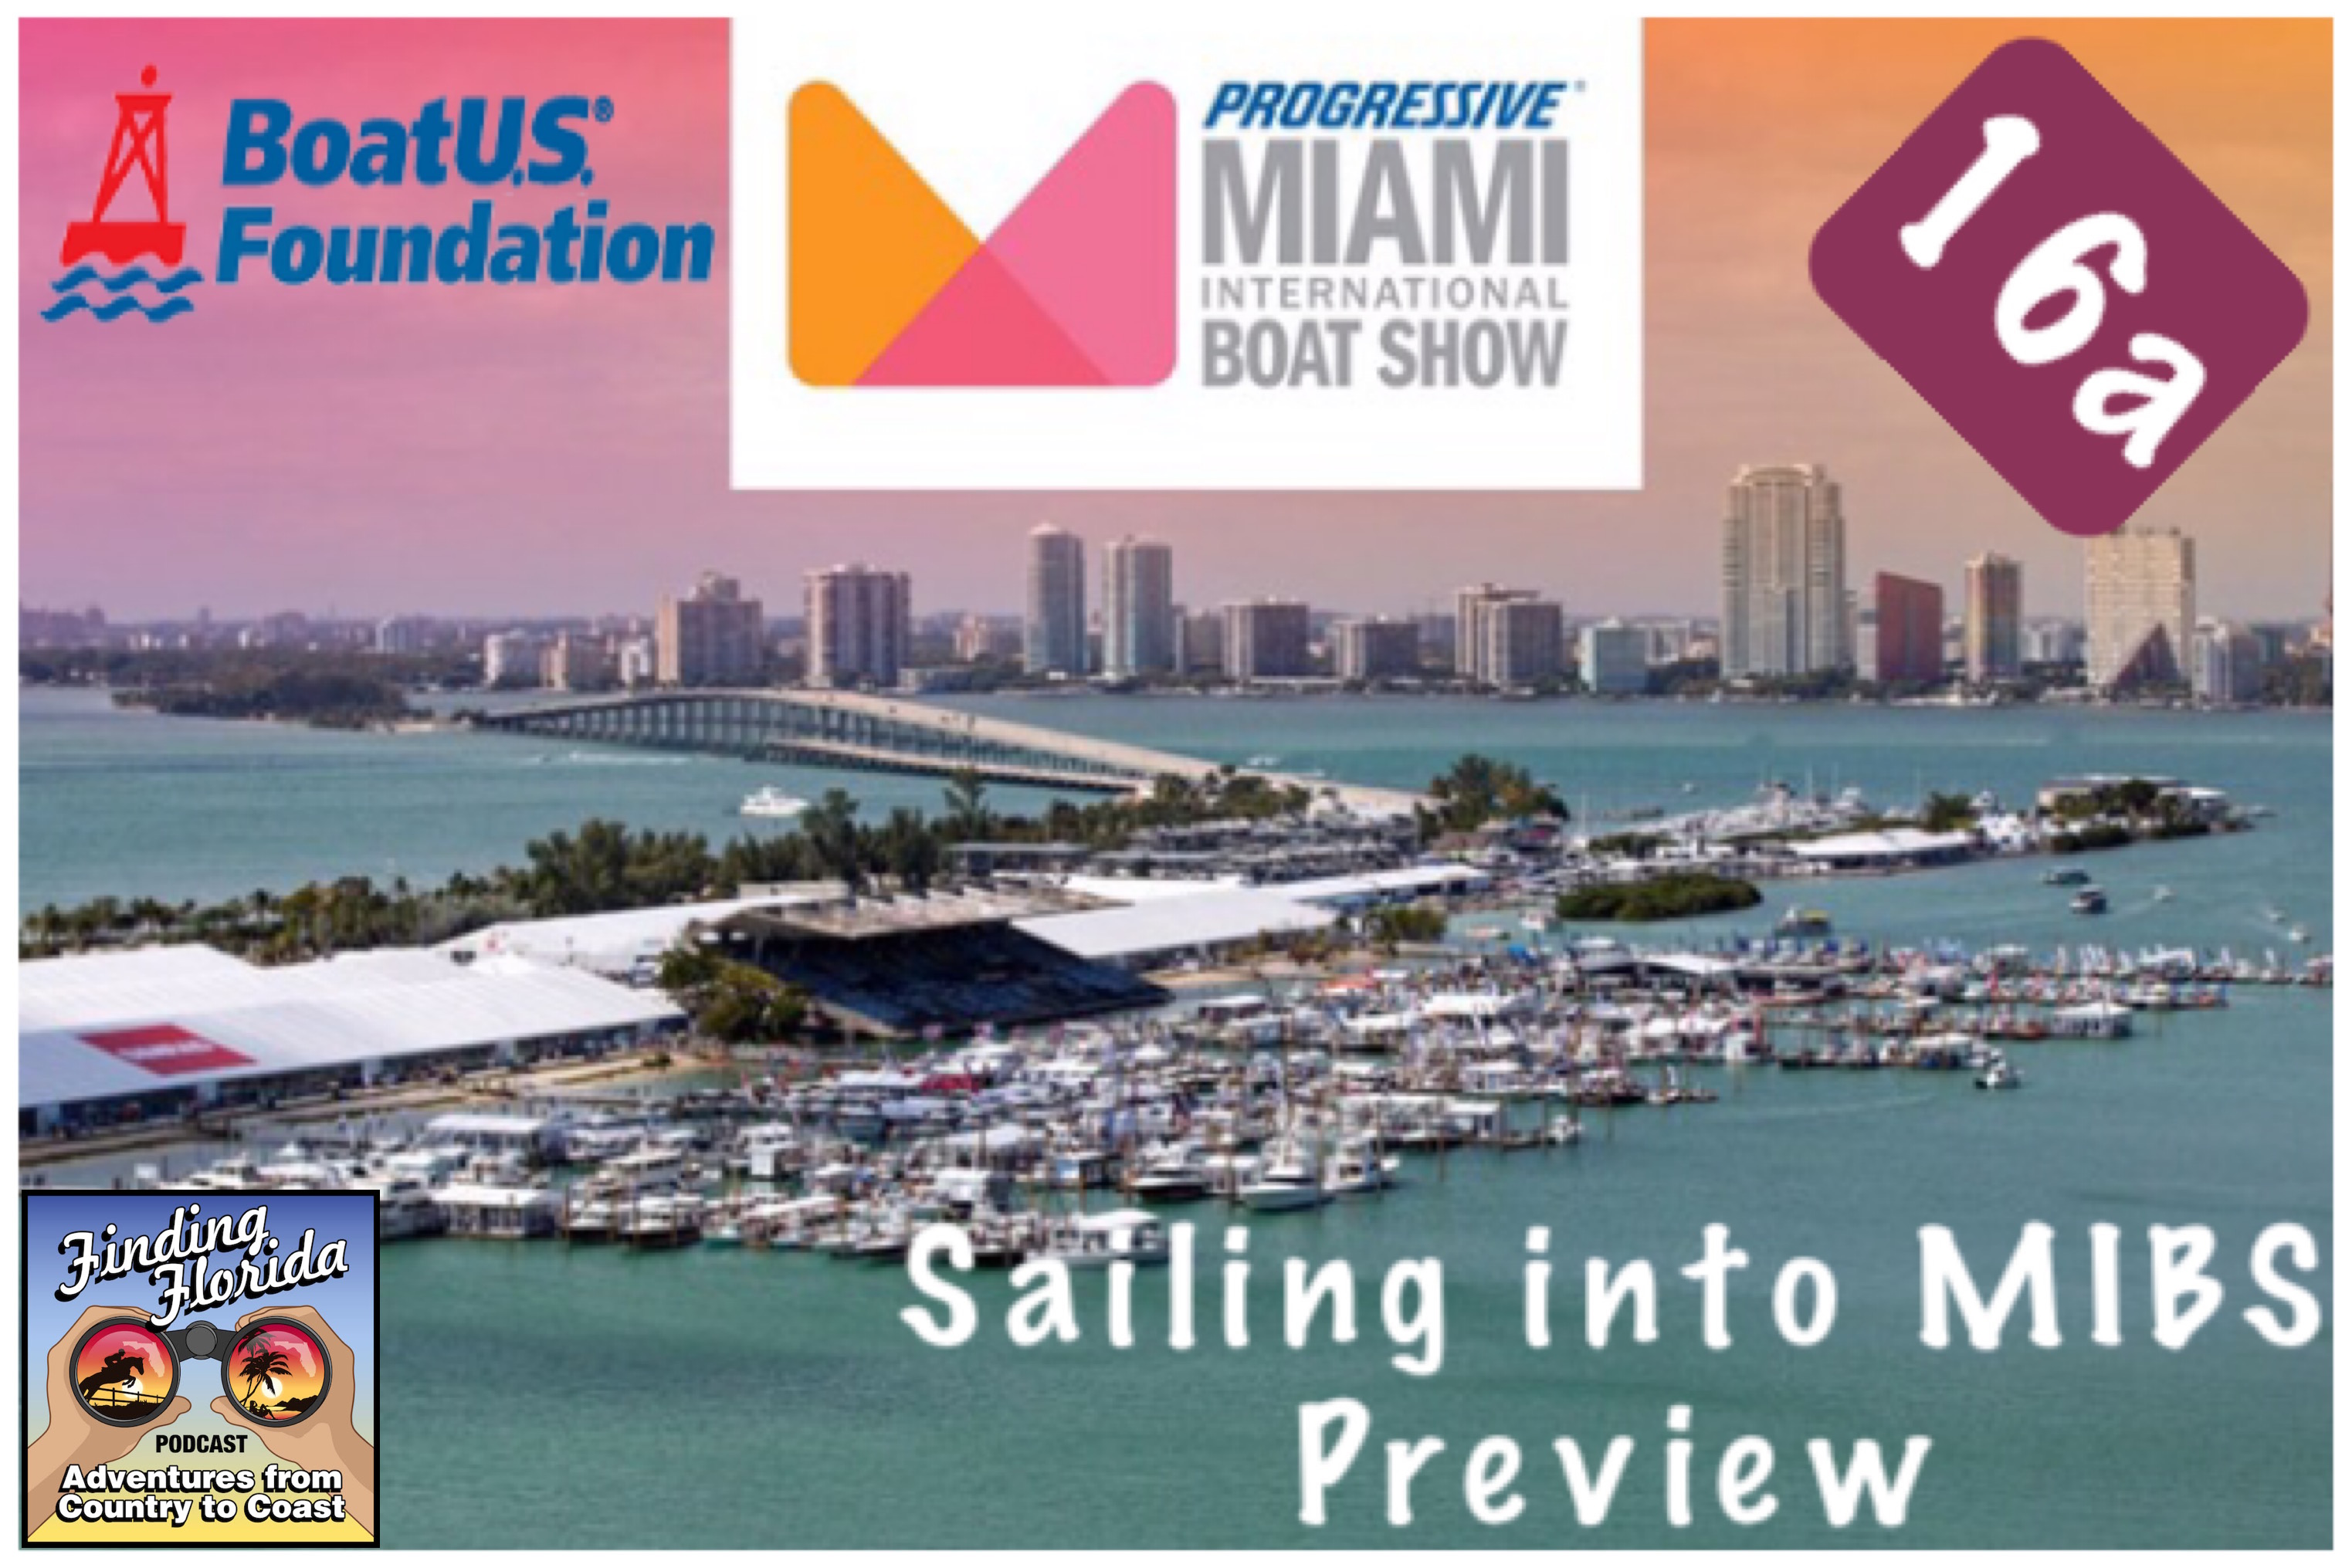 Look Ahead to our Trip to the Miami International Boat Show